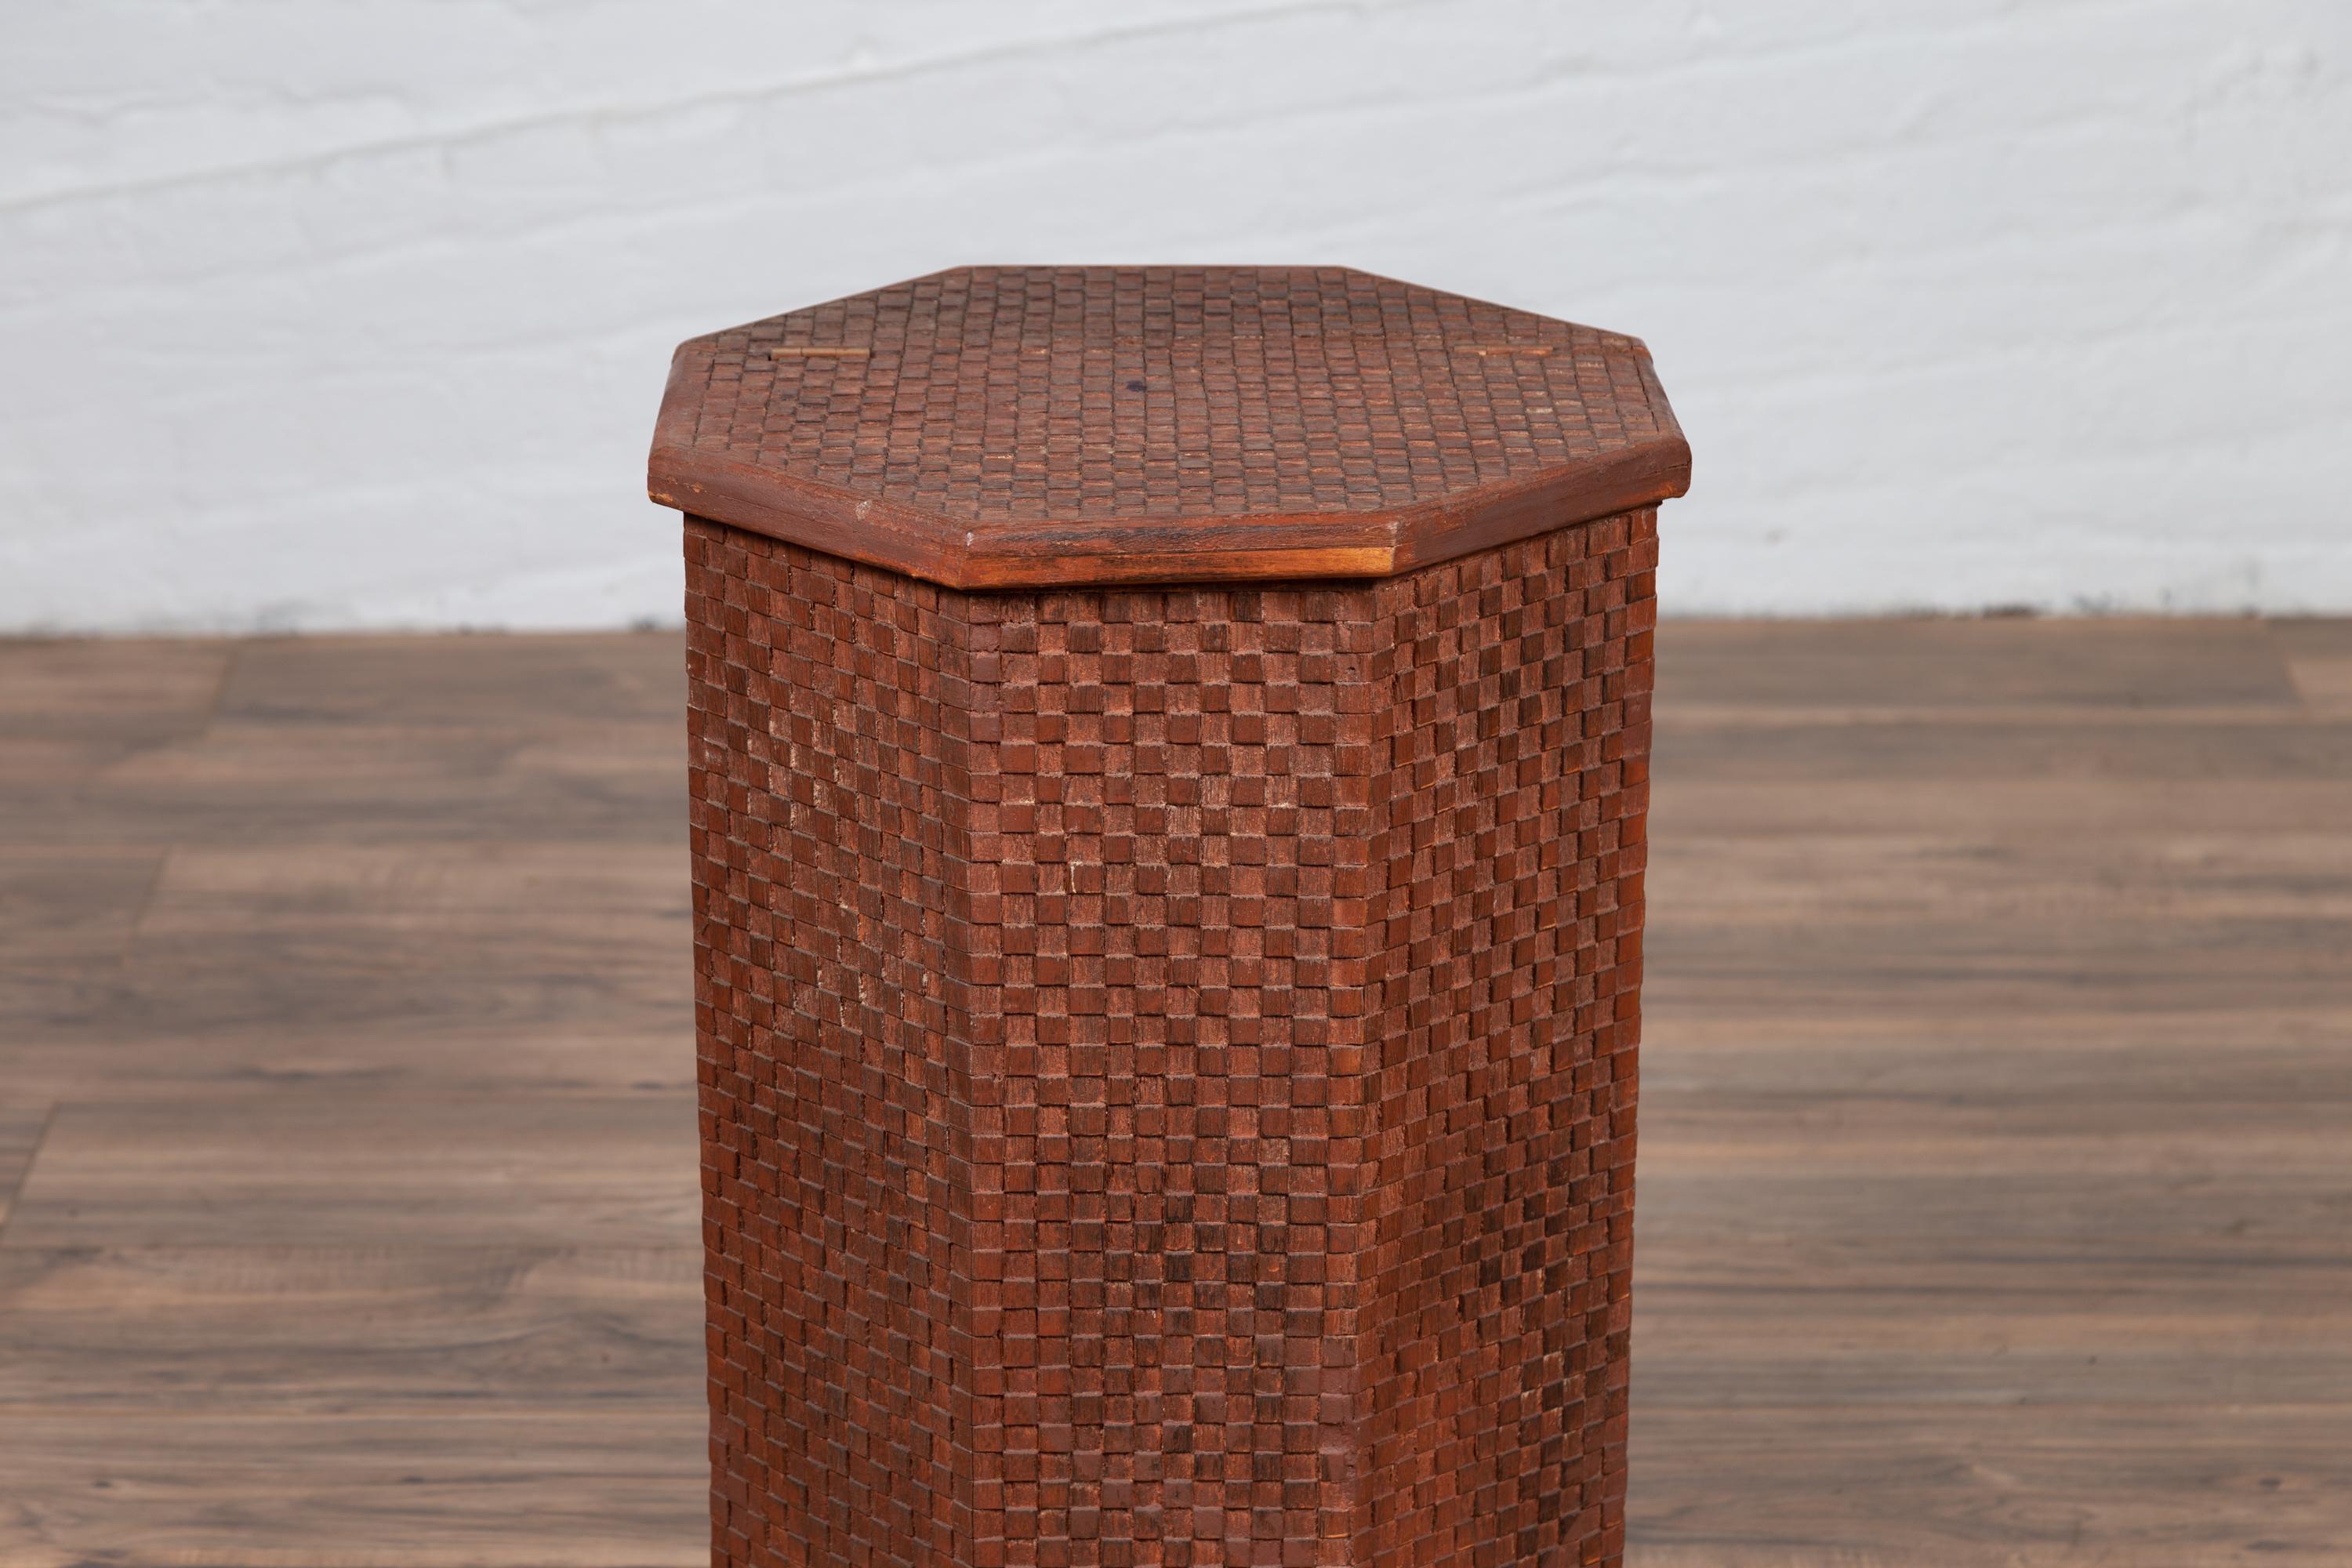 Carved Vintage Thai Hexagonal Wooden Clothes Hamper with Checkered Patterns